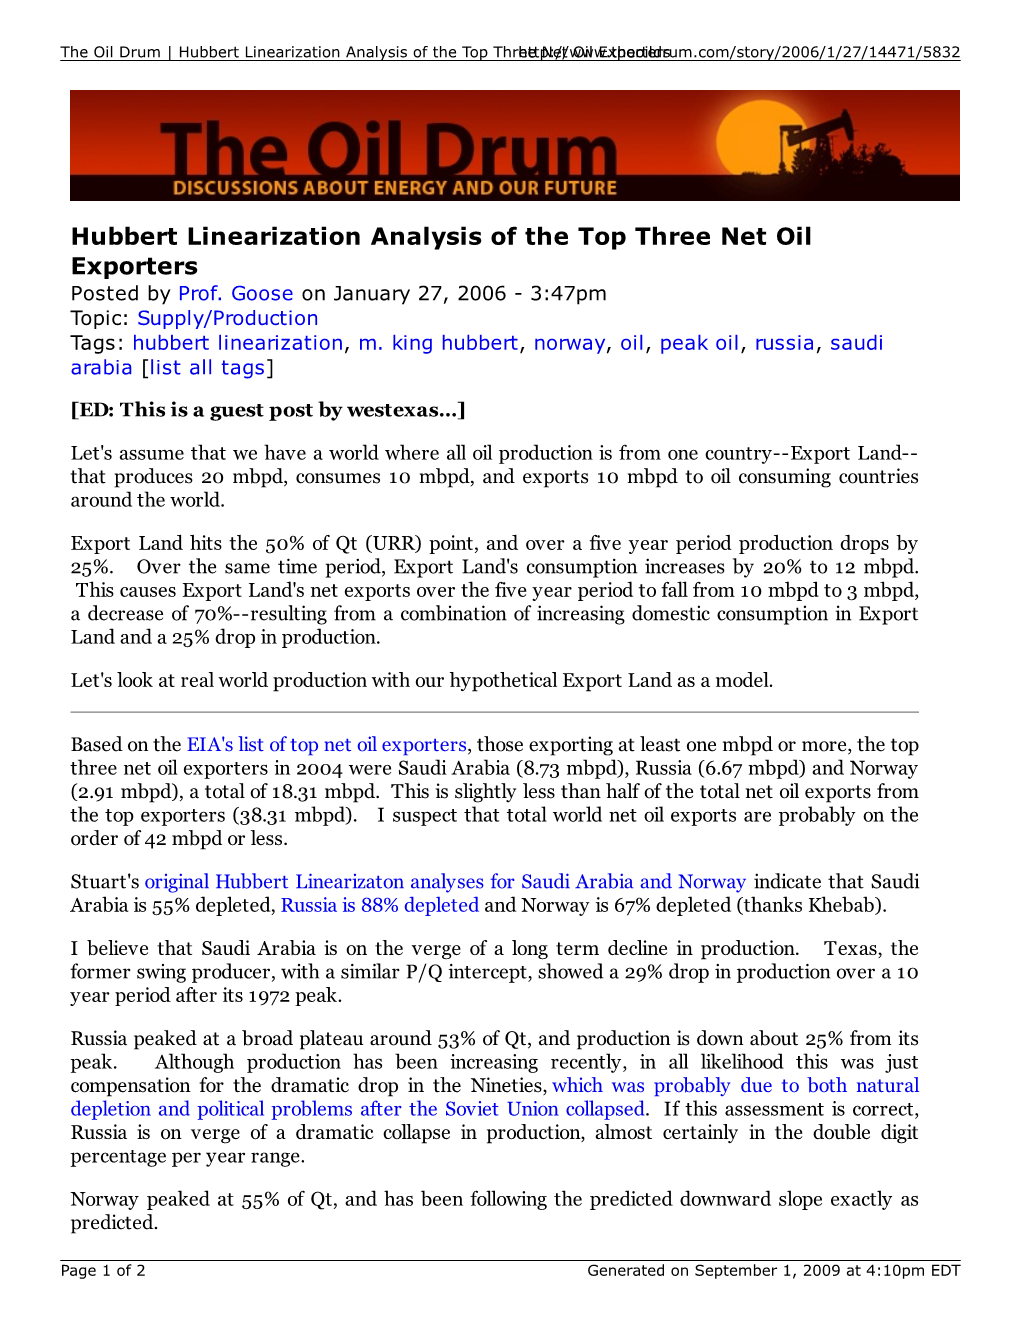 Hubbert Linearization Analysis of the Top Three Net Oil Exporters Posted by Prof